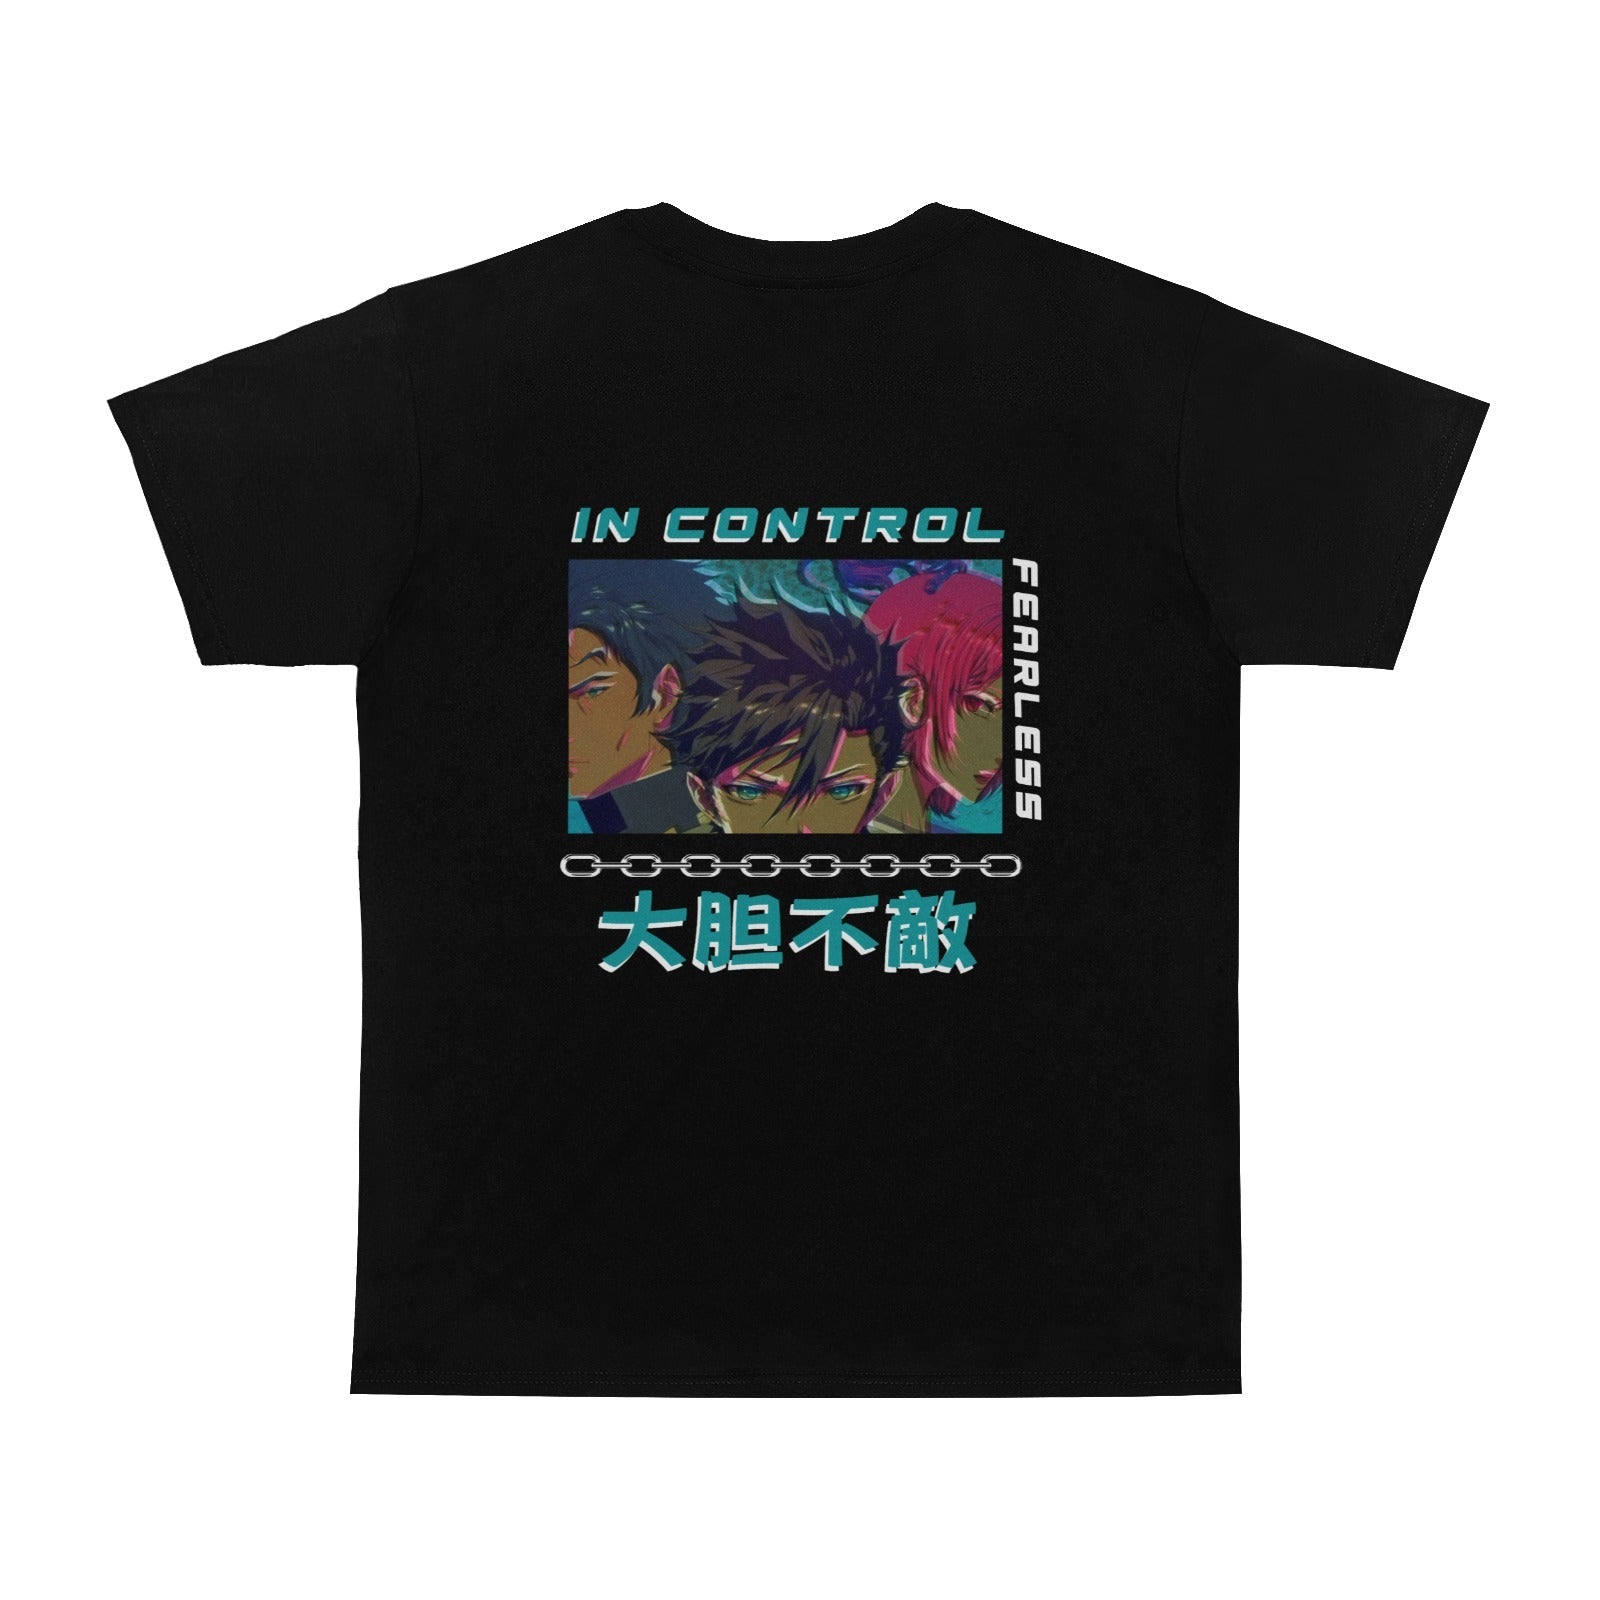 Fearless Anime Graphic Shirt - In Control Clothing